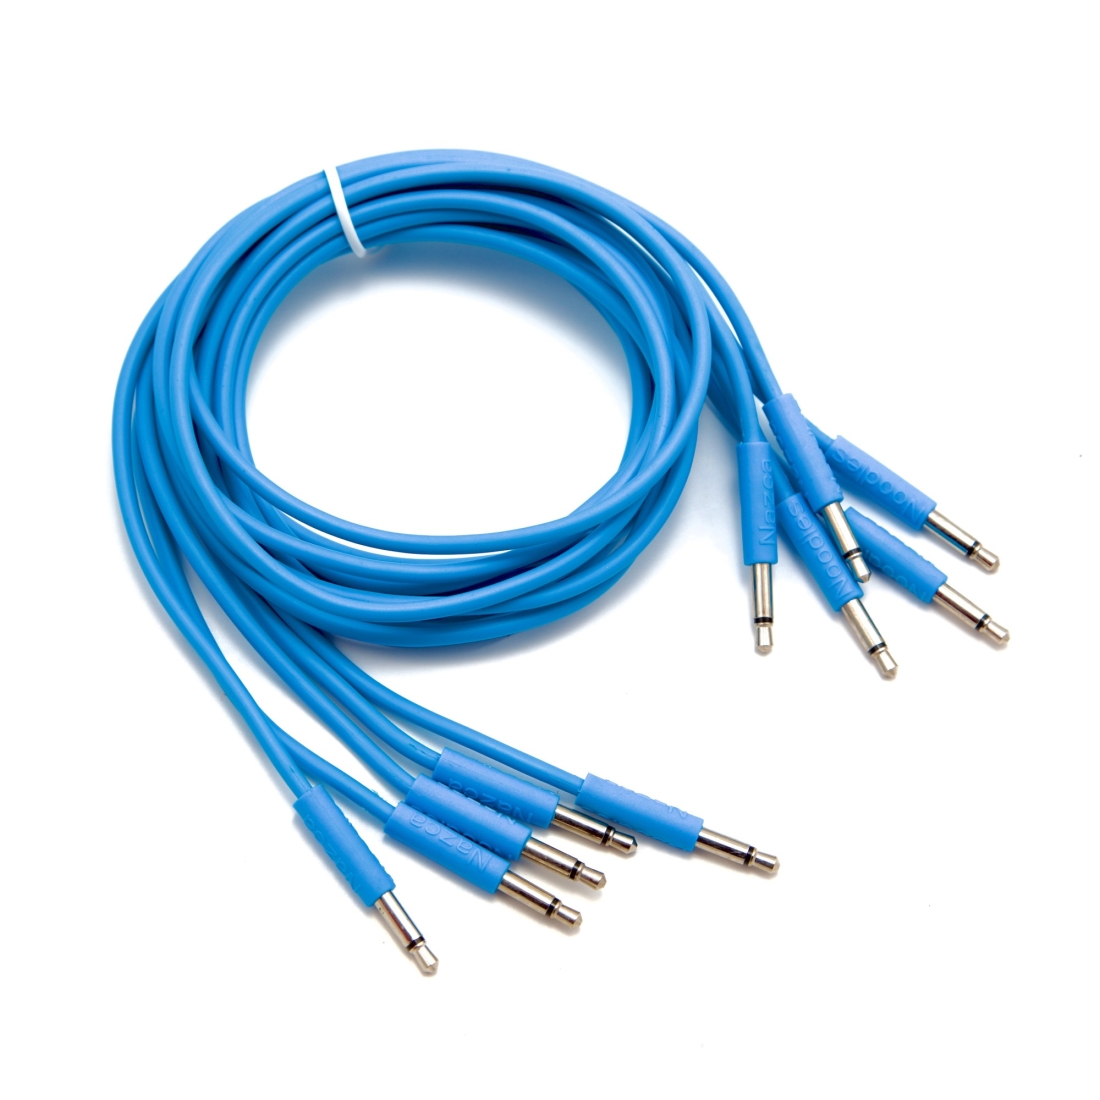 Patch Cables 3.5mm TS to 3.5mm TS - 150cm - Blue (5-Pack)